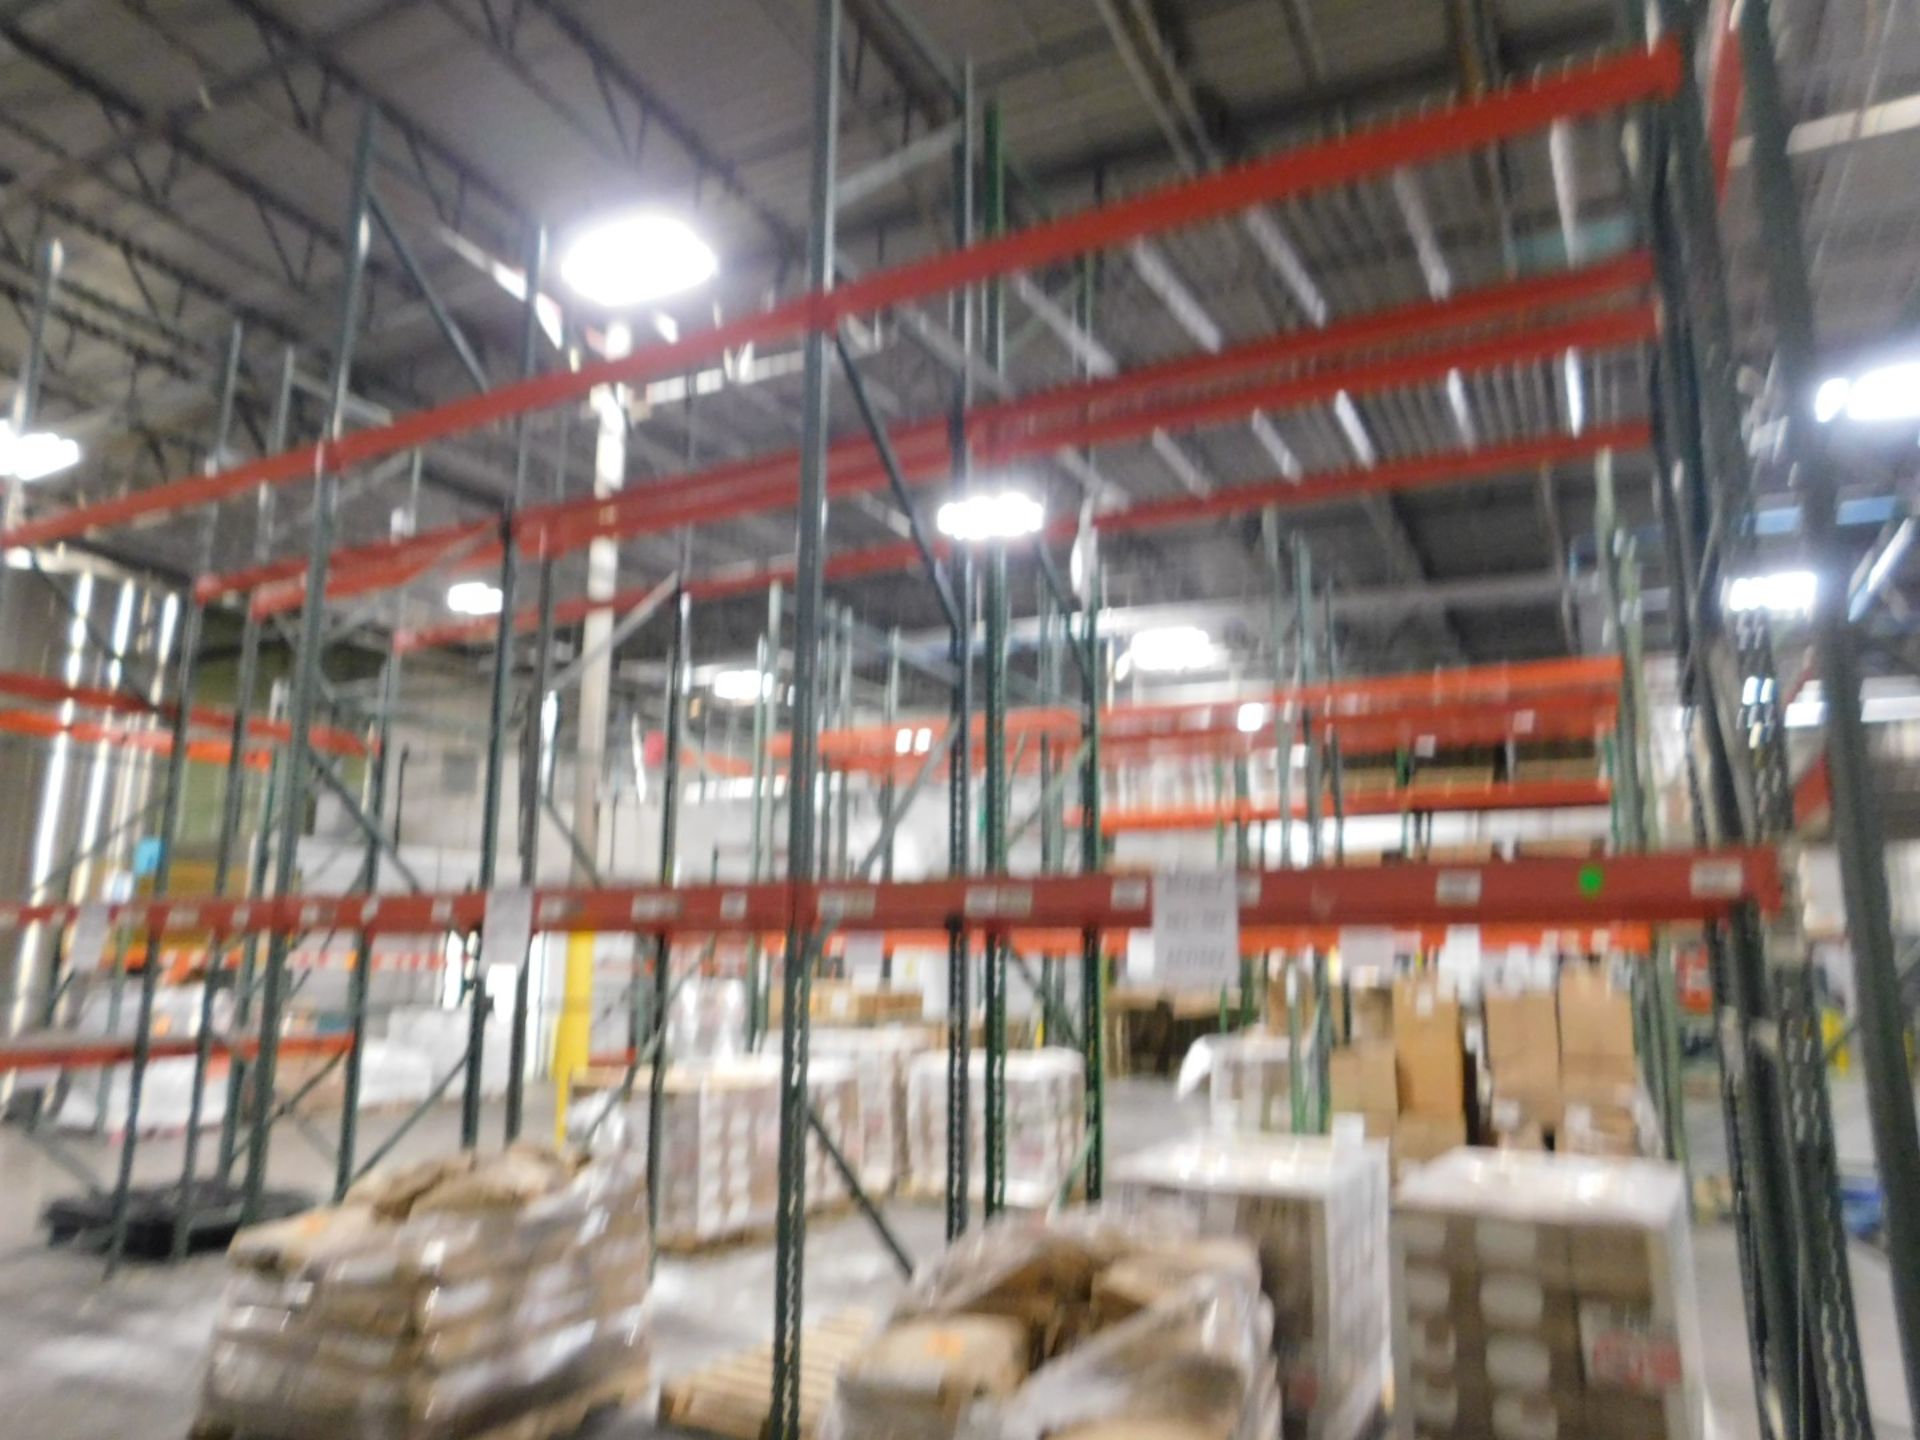 Sections of Pallet Racking - Image 5 of 5